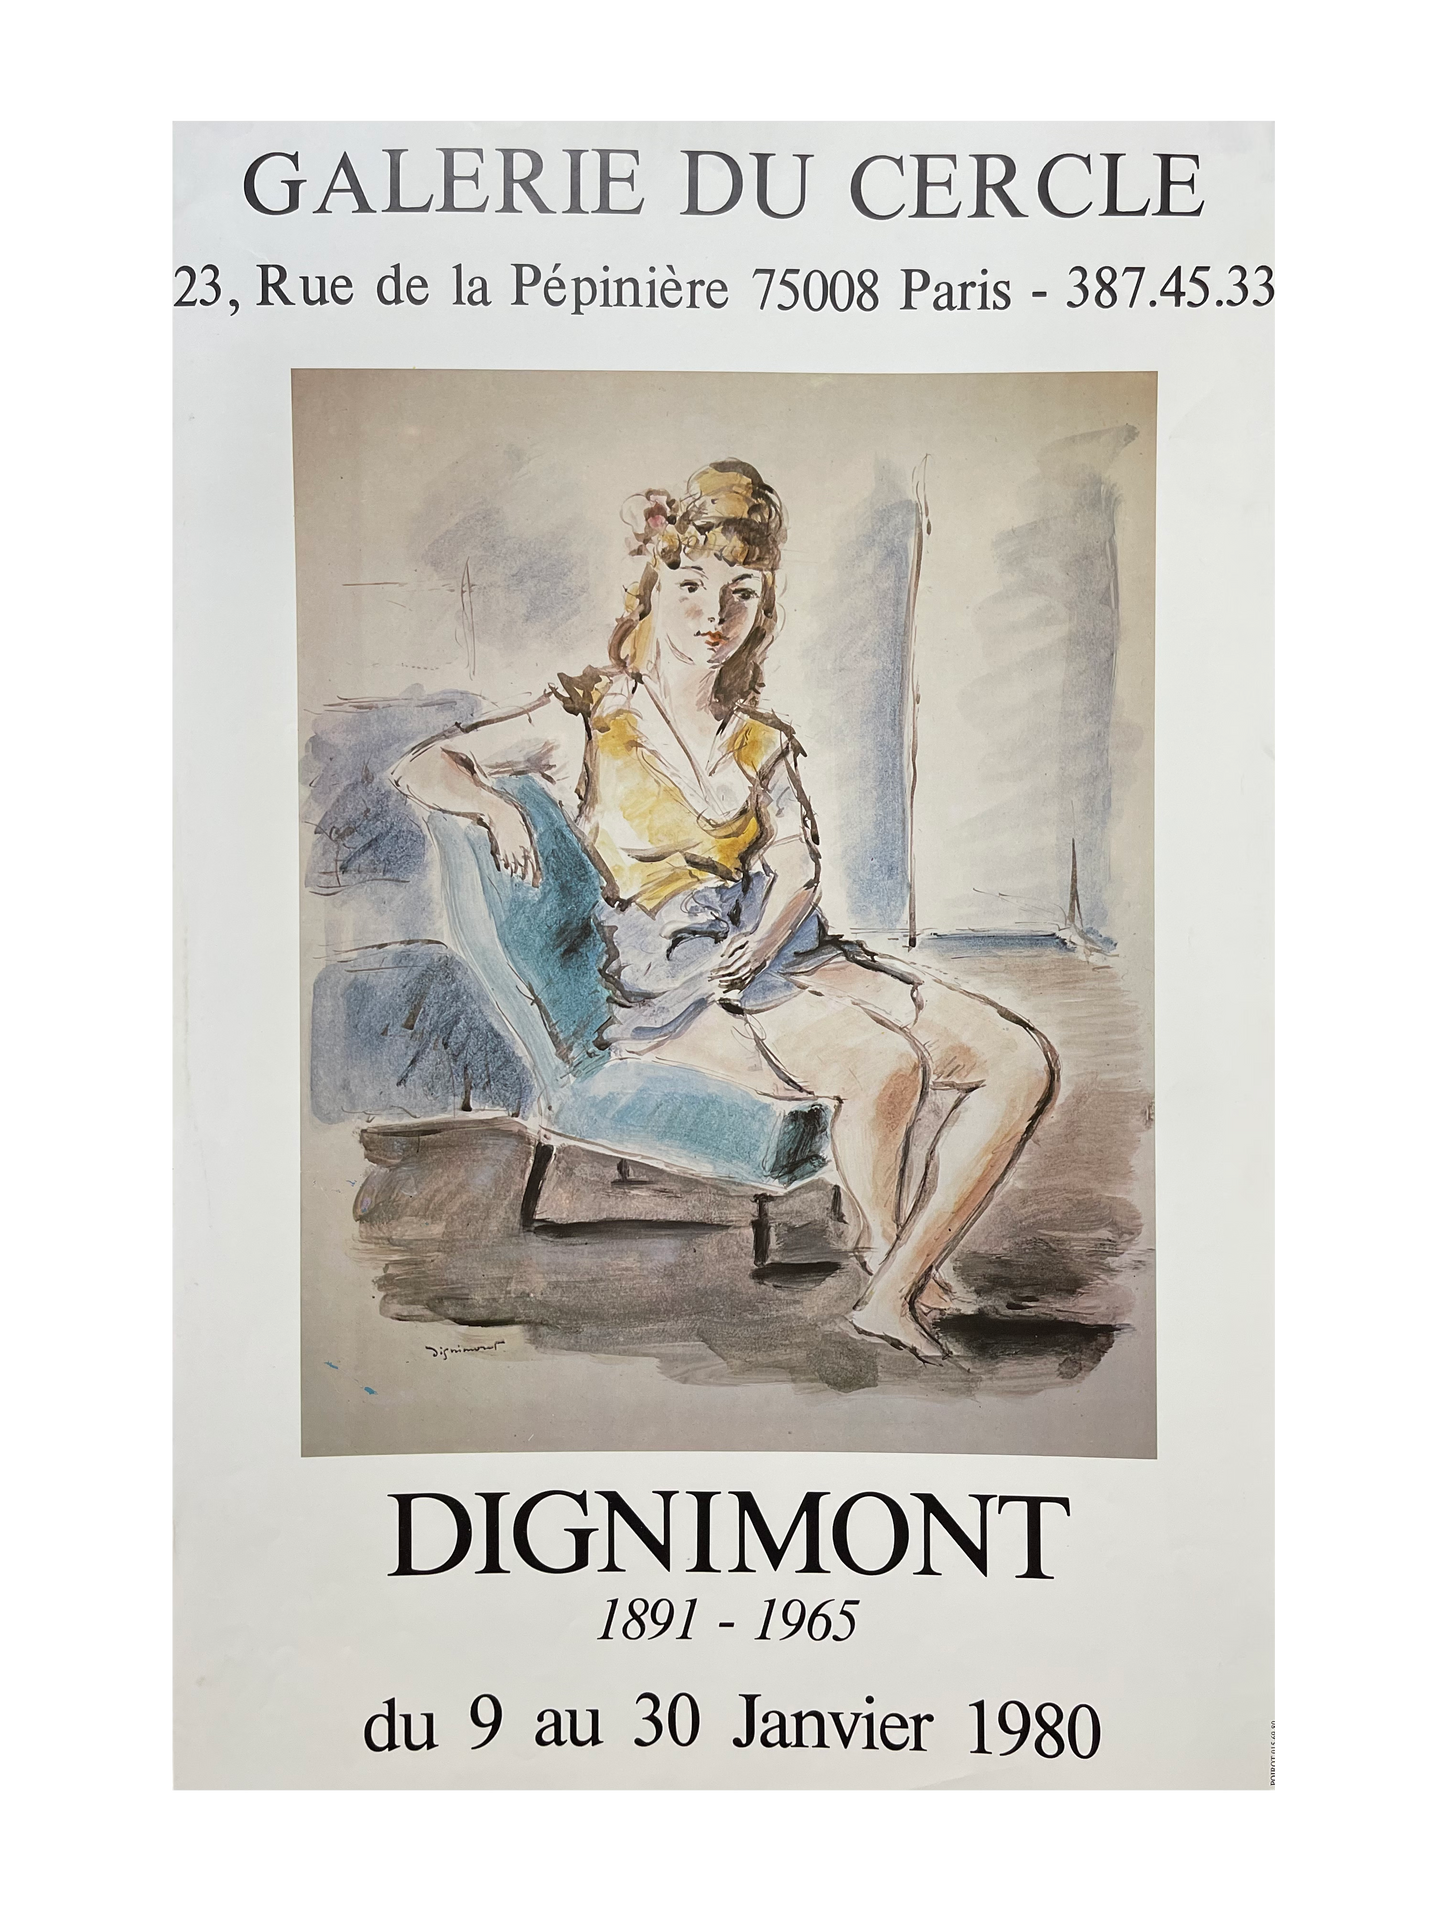 Dignimont Exhibition Poster